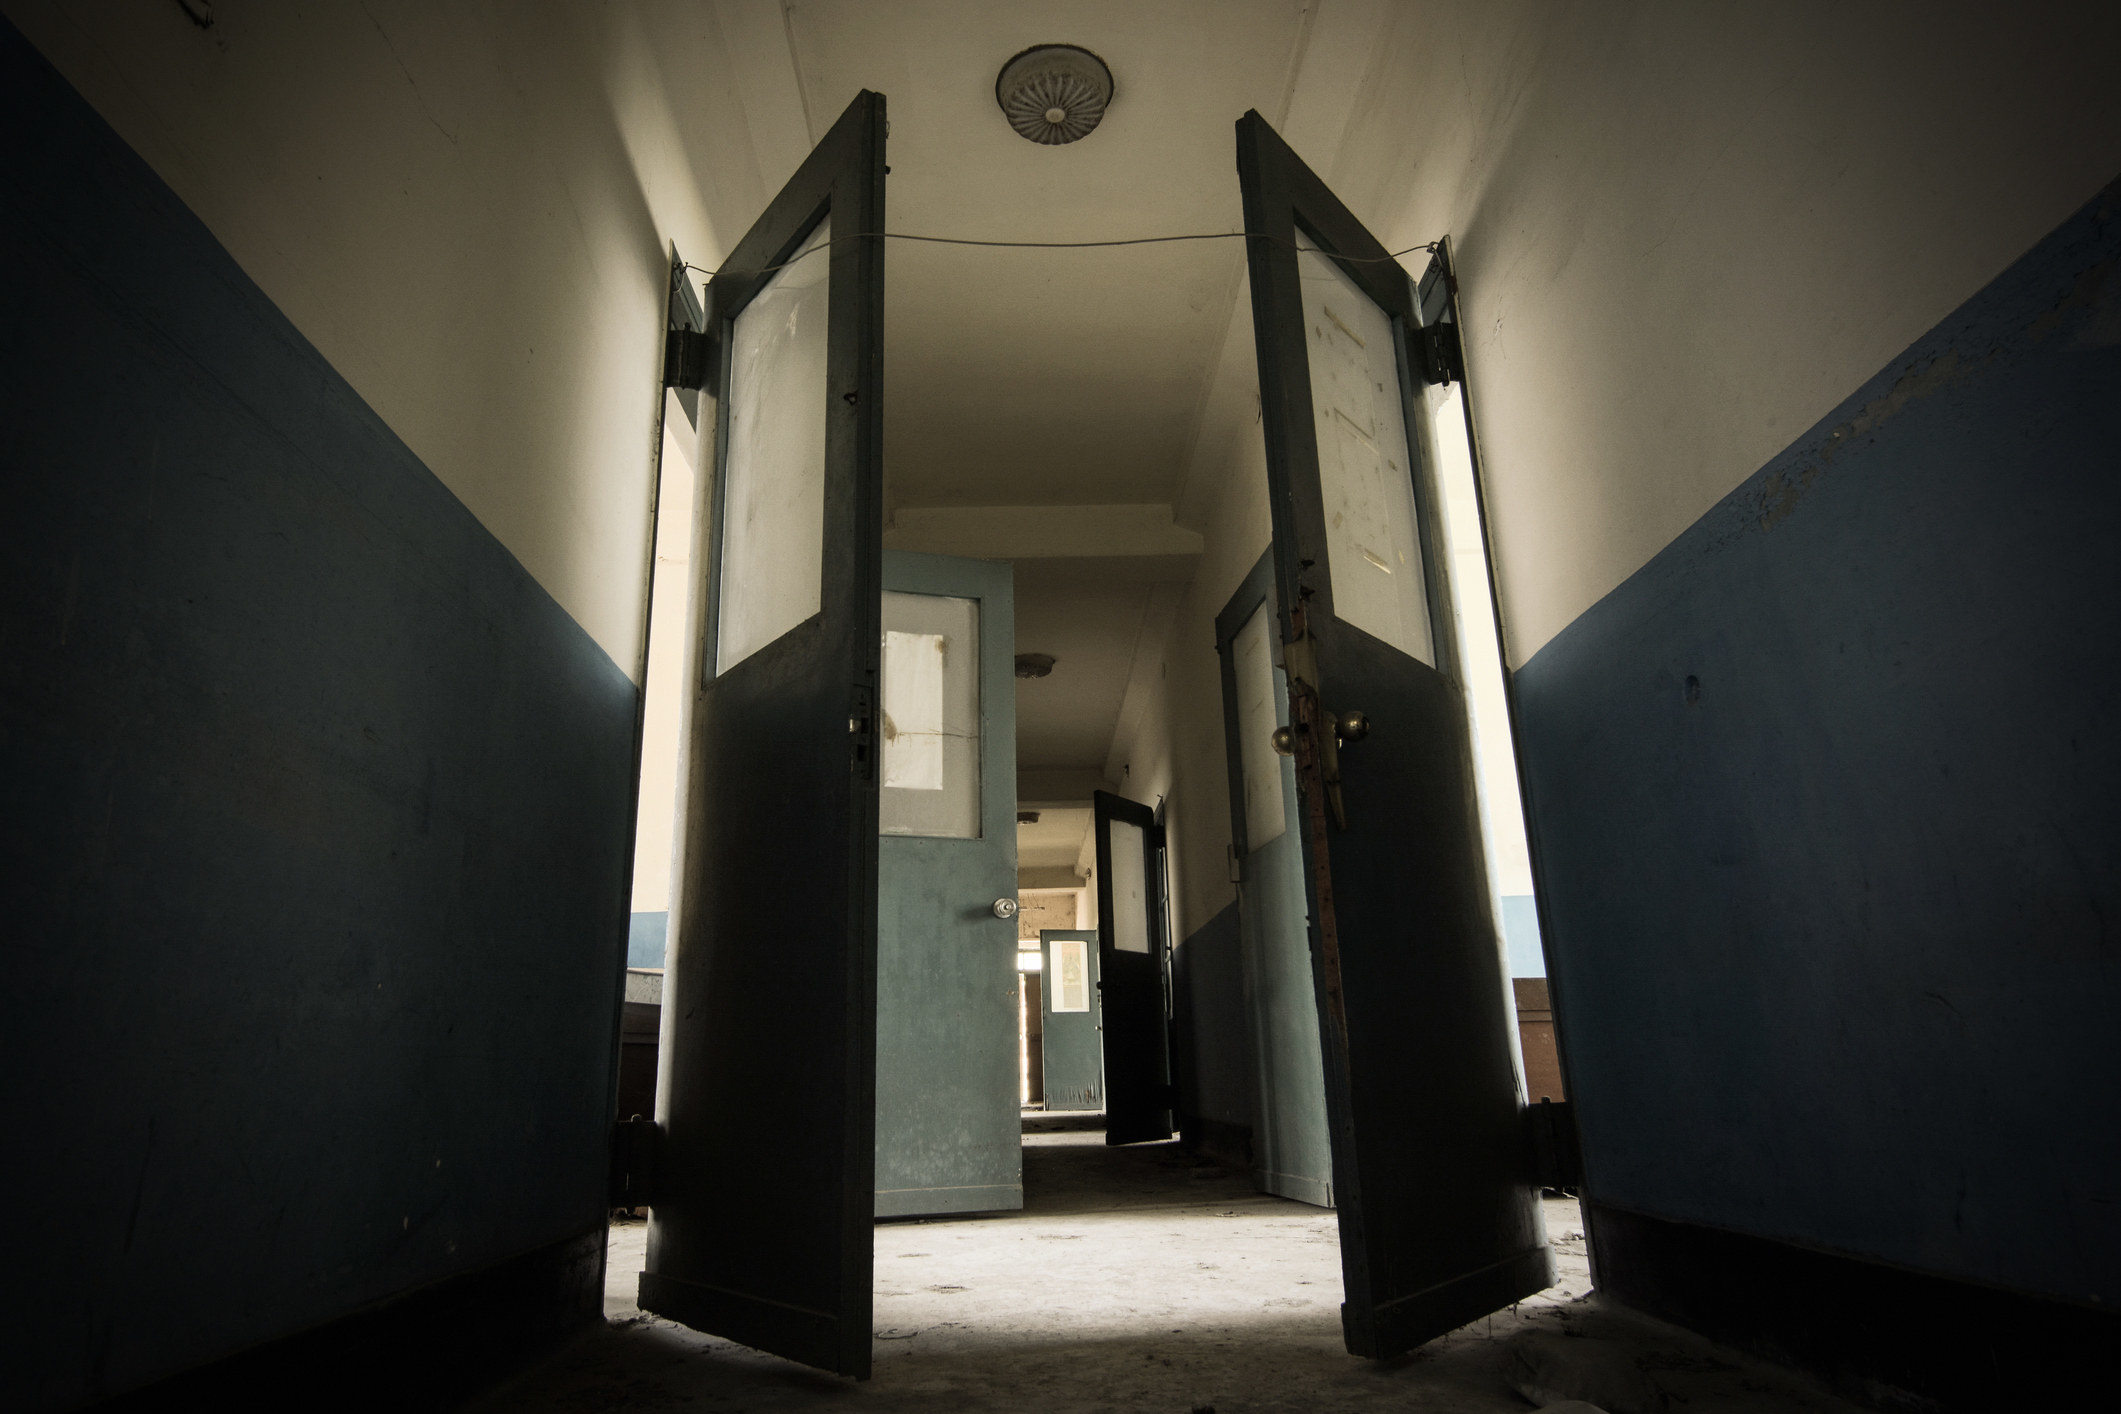 Dark hallway in a scary and possibly haunted abandoned sanatorium